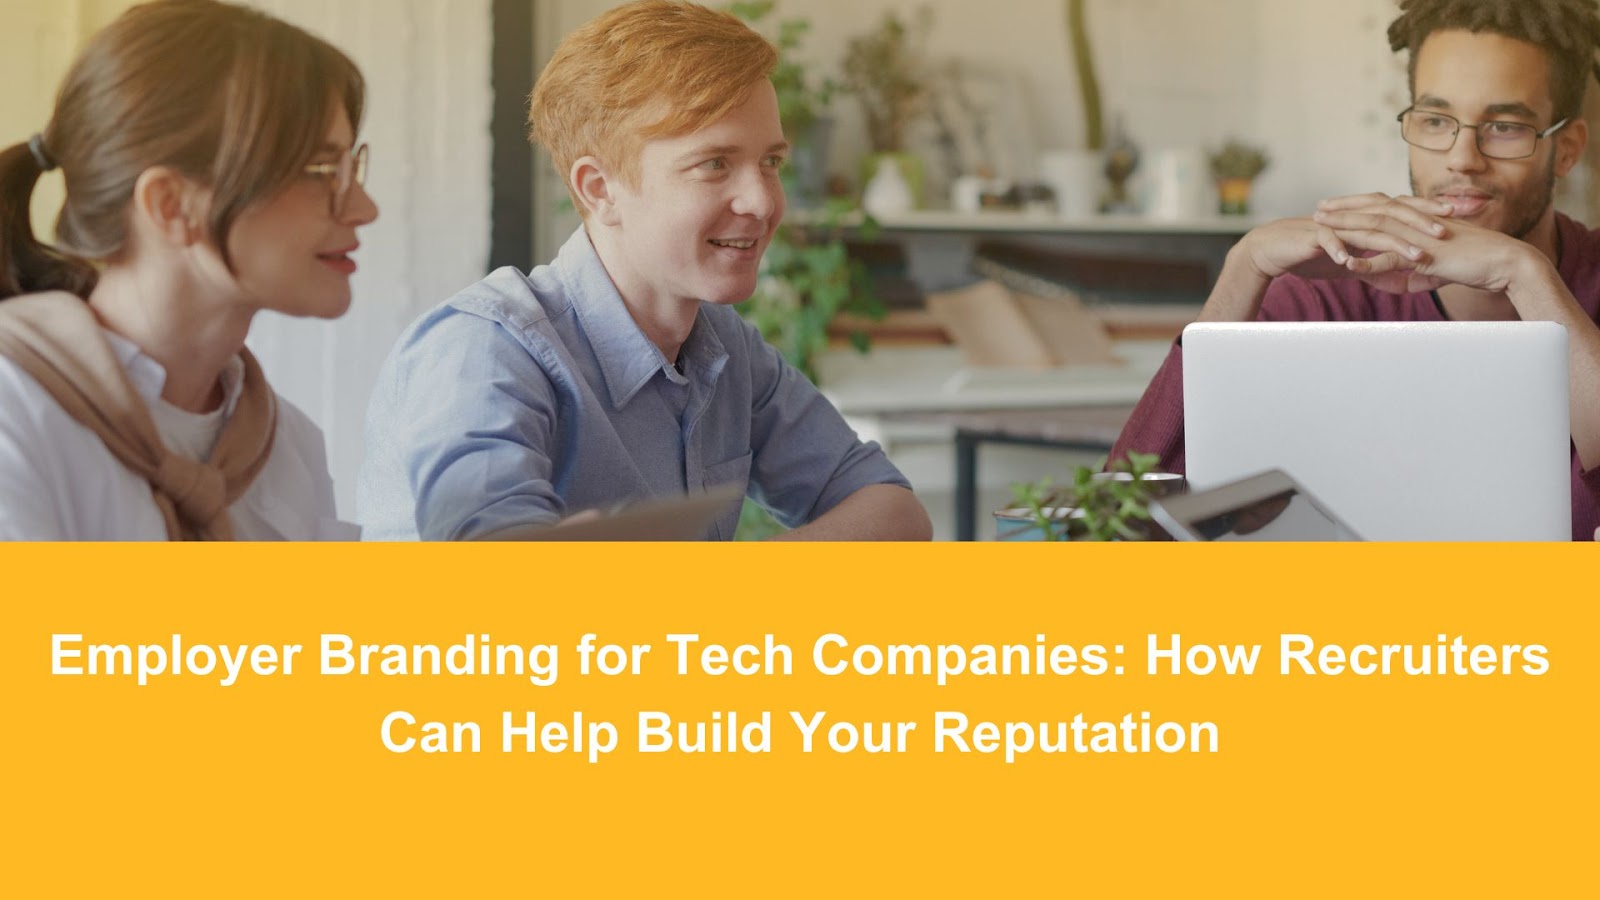 Employer Branding for Tech Companies: How Recruitment Agencies Can Help Build Your Reputation